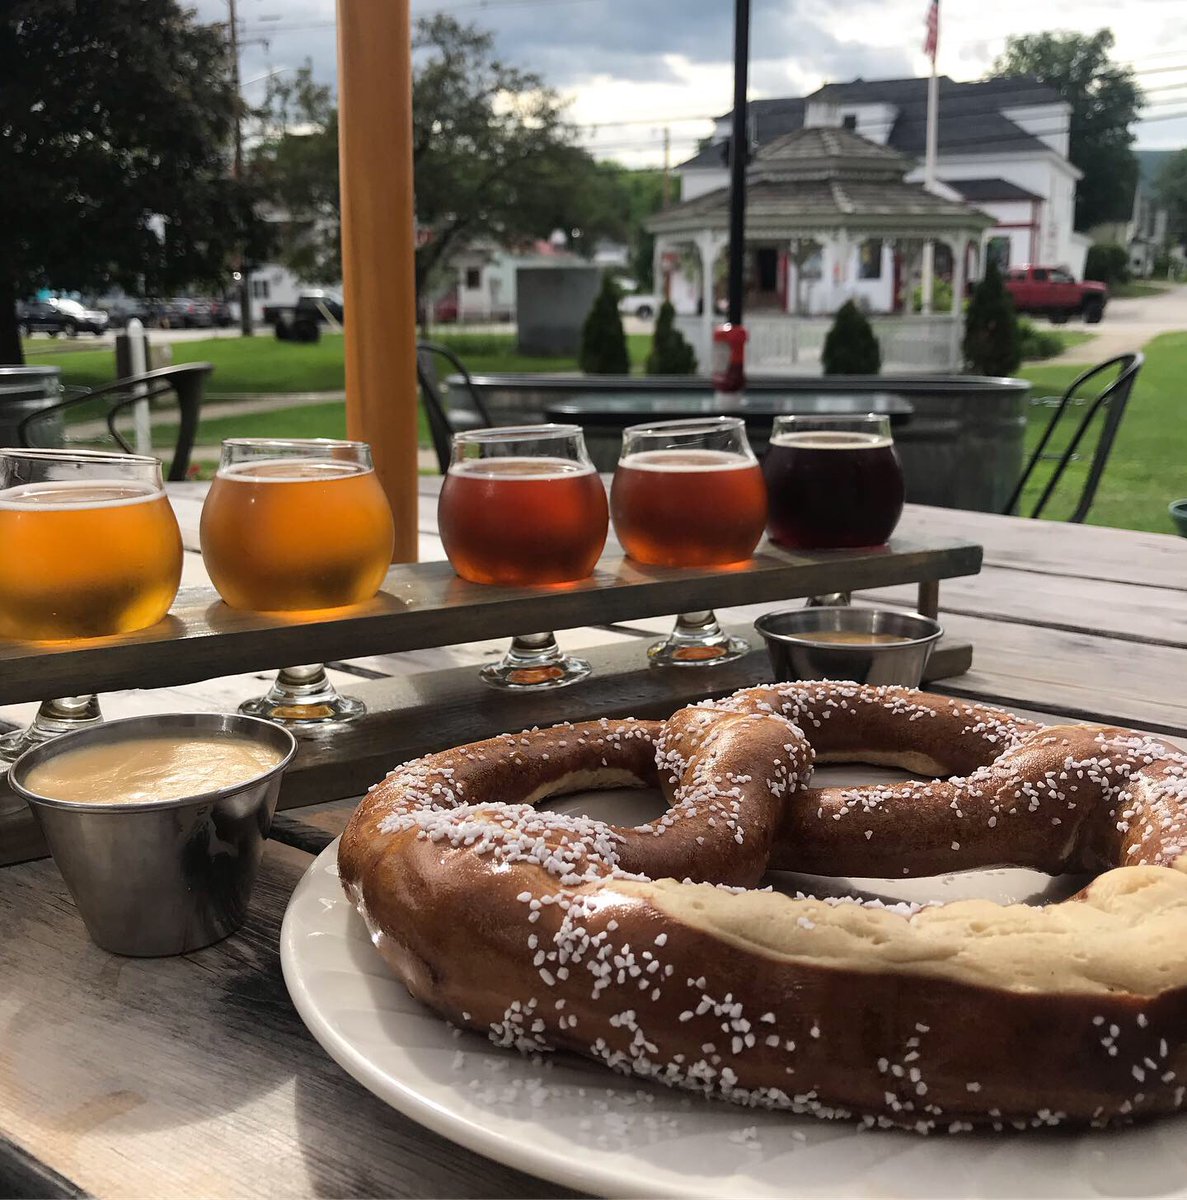 Thirsty for some adventure? 🍺🌭 Head on over to One Love Brewery in Lincoln, NH for the ultimate fuel-up! Our craft beer and food will have you ready to tackle anything. 🏞️💪 Don't forget to tag #onelovebrewery, #drinktheeast, and #fuelyouradventure! 🍻👊